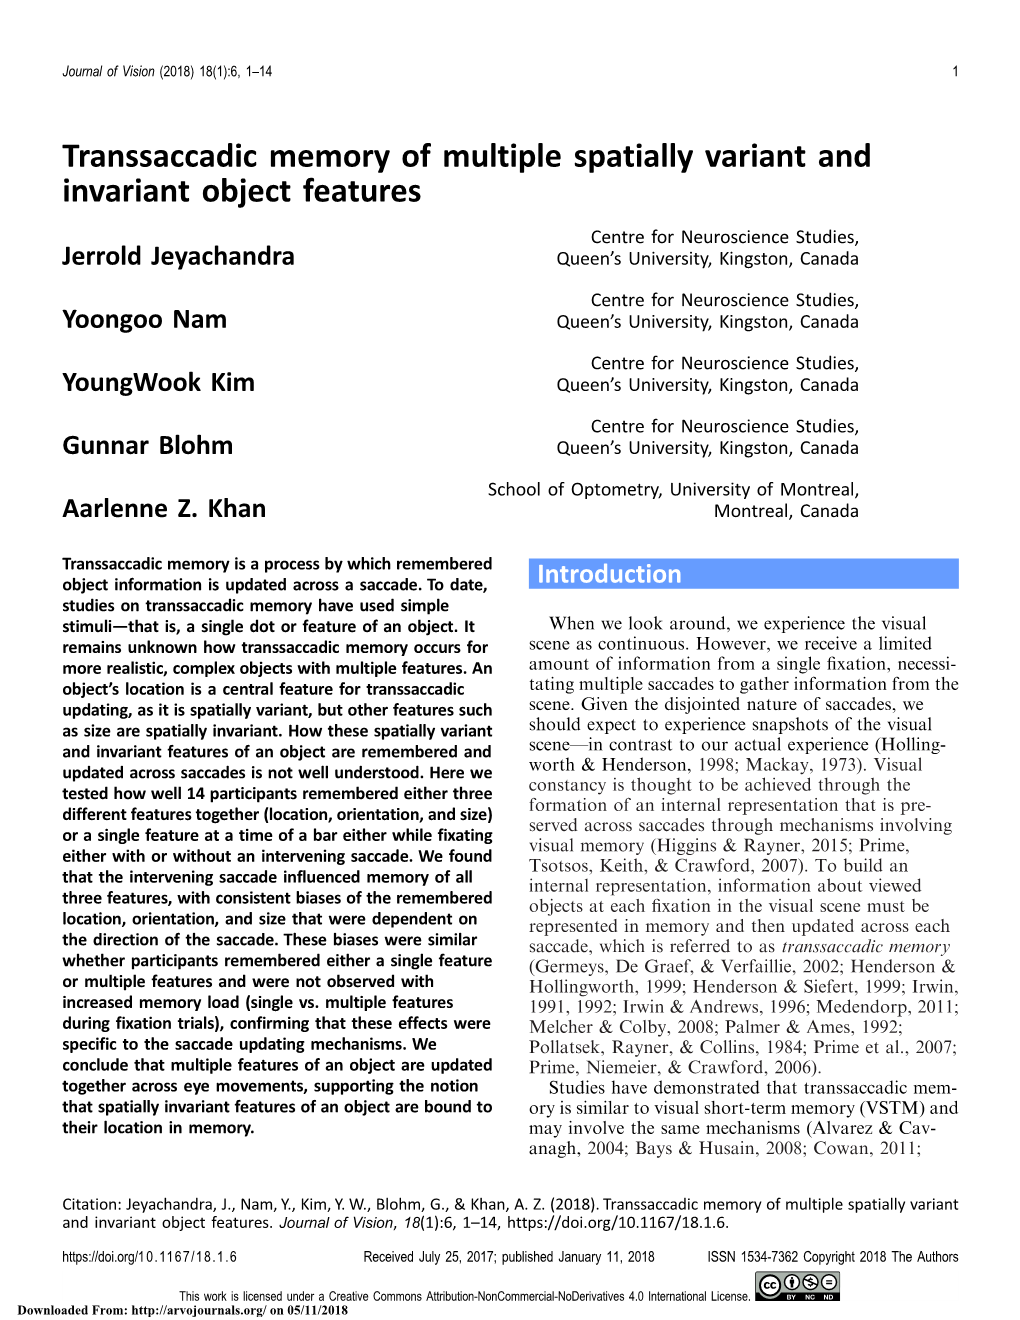 Transsaccadic Memory of Multiple Spatially Variant and Invariant Object